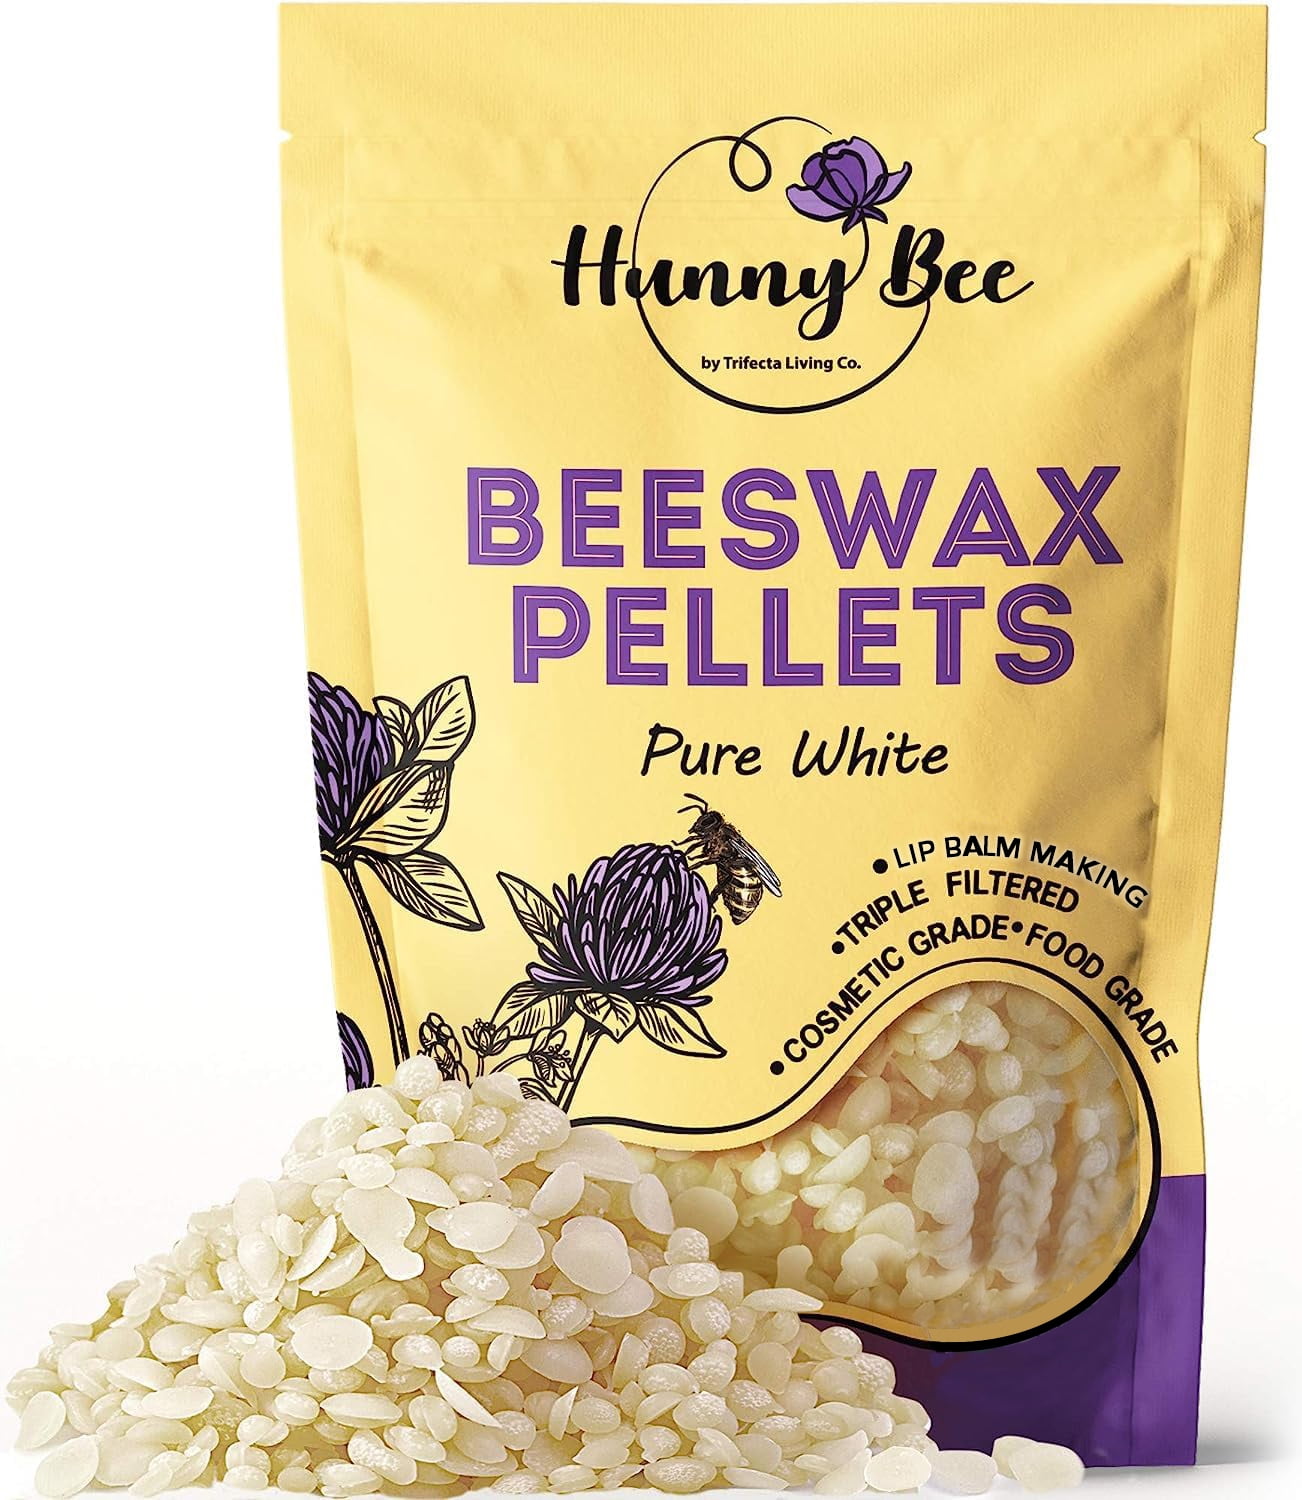 Hunnybee White Beeswax Pellets - 1lb Triple Filtered Bees Wax ideal for  Lotion Making, Candle Making, and Lip Balm Making 